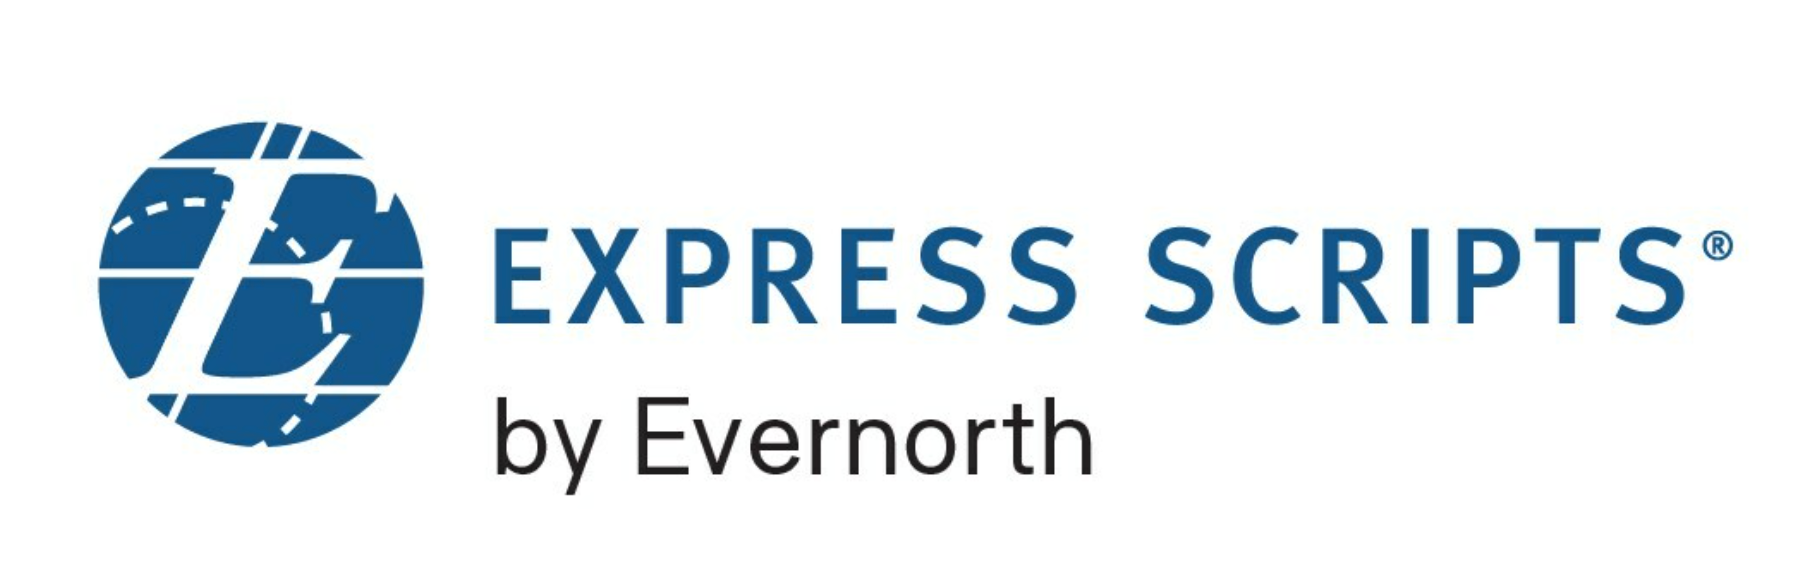 Express Scripts Adds Cyltezo, Hyrimoz and an Unbranded Version of Hyrimoz to Its Main Formulary